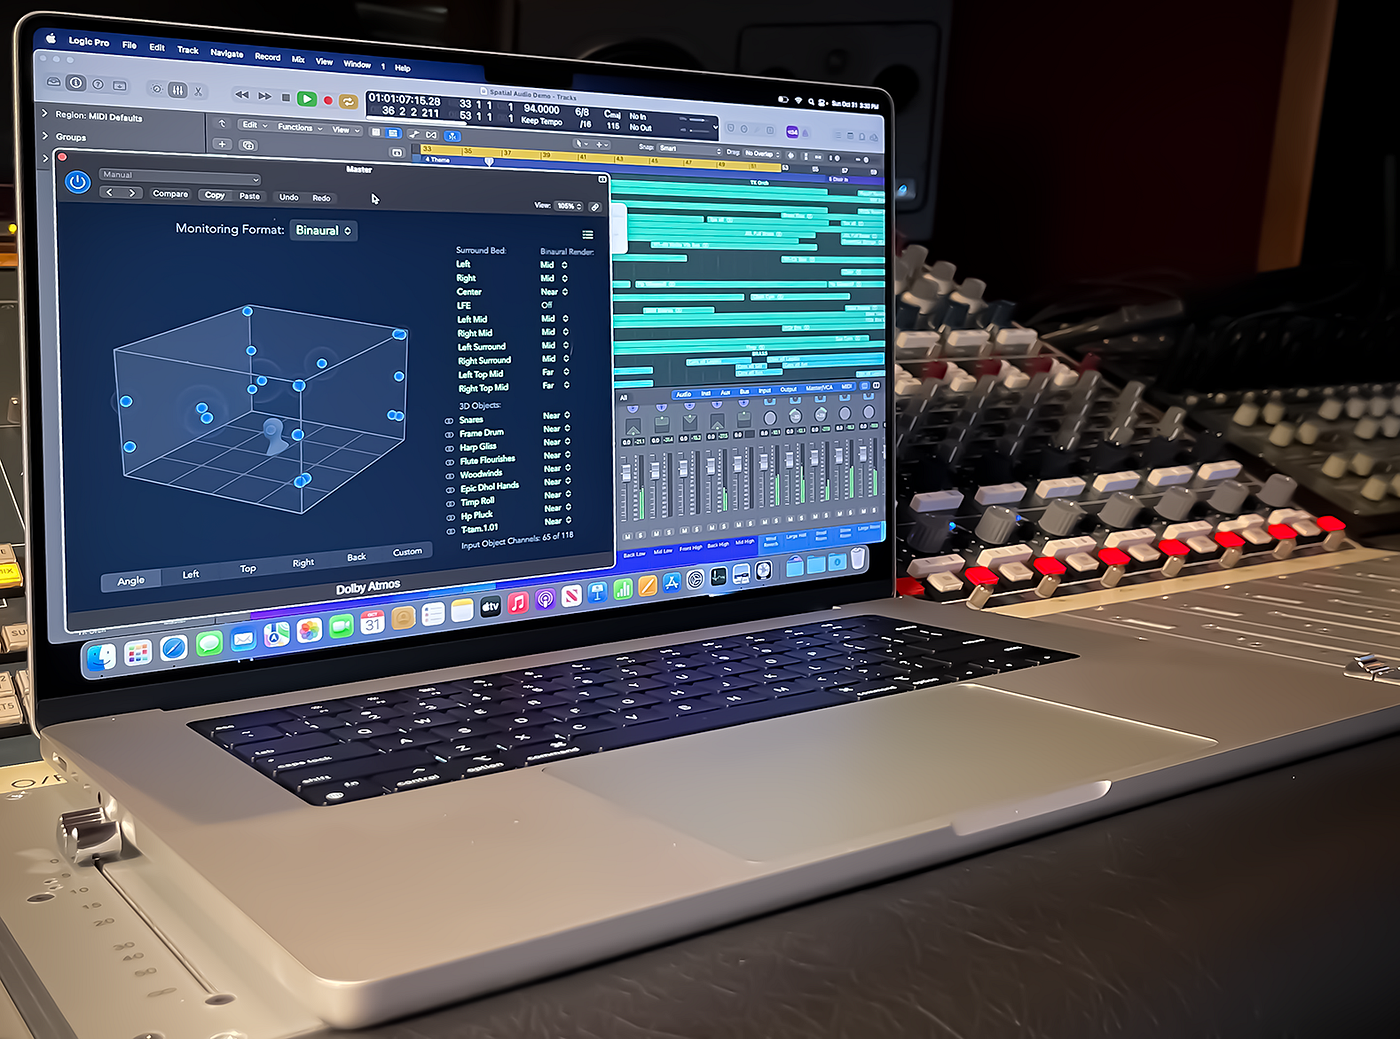 Fruity Loops Finally Comes to Mac